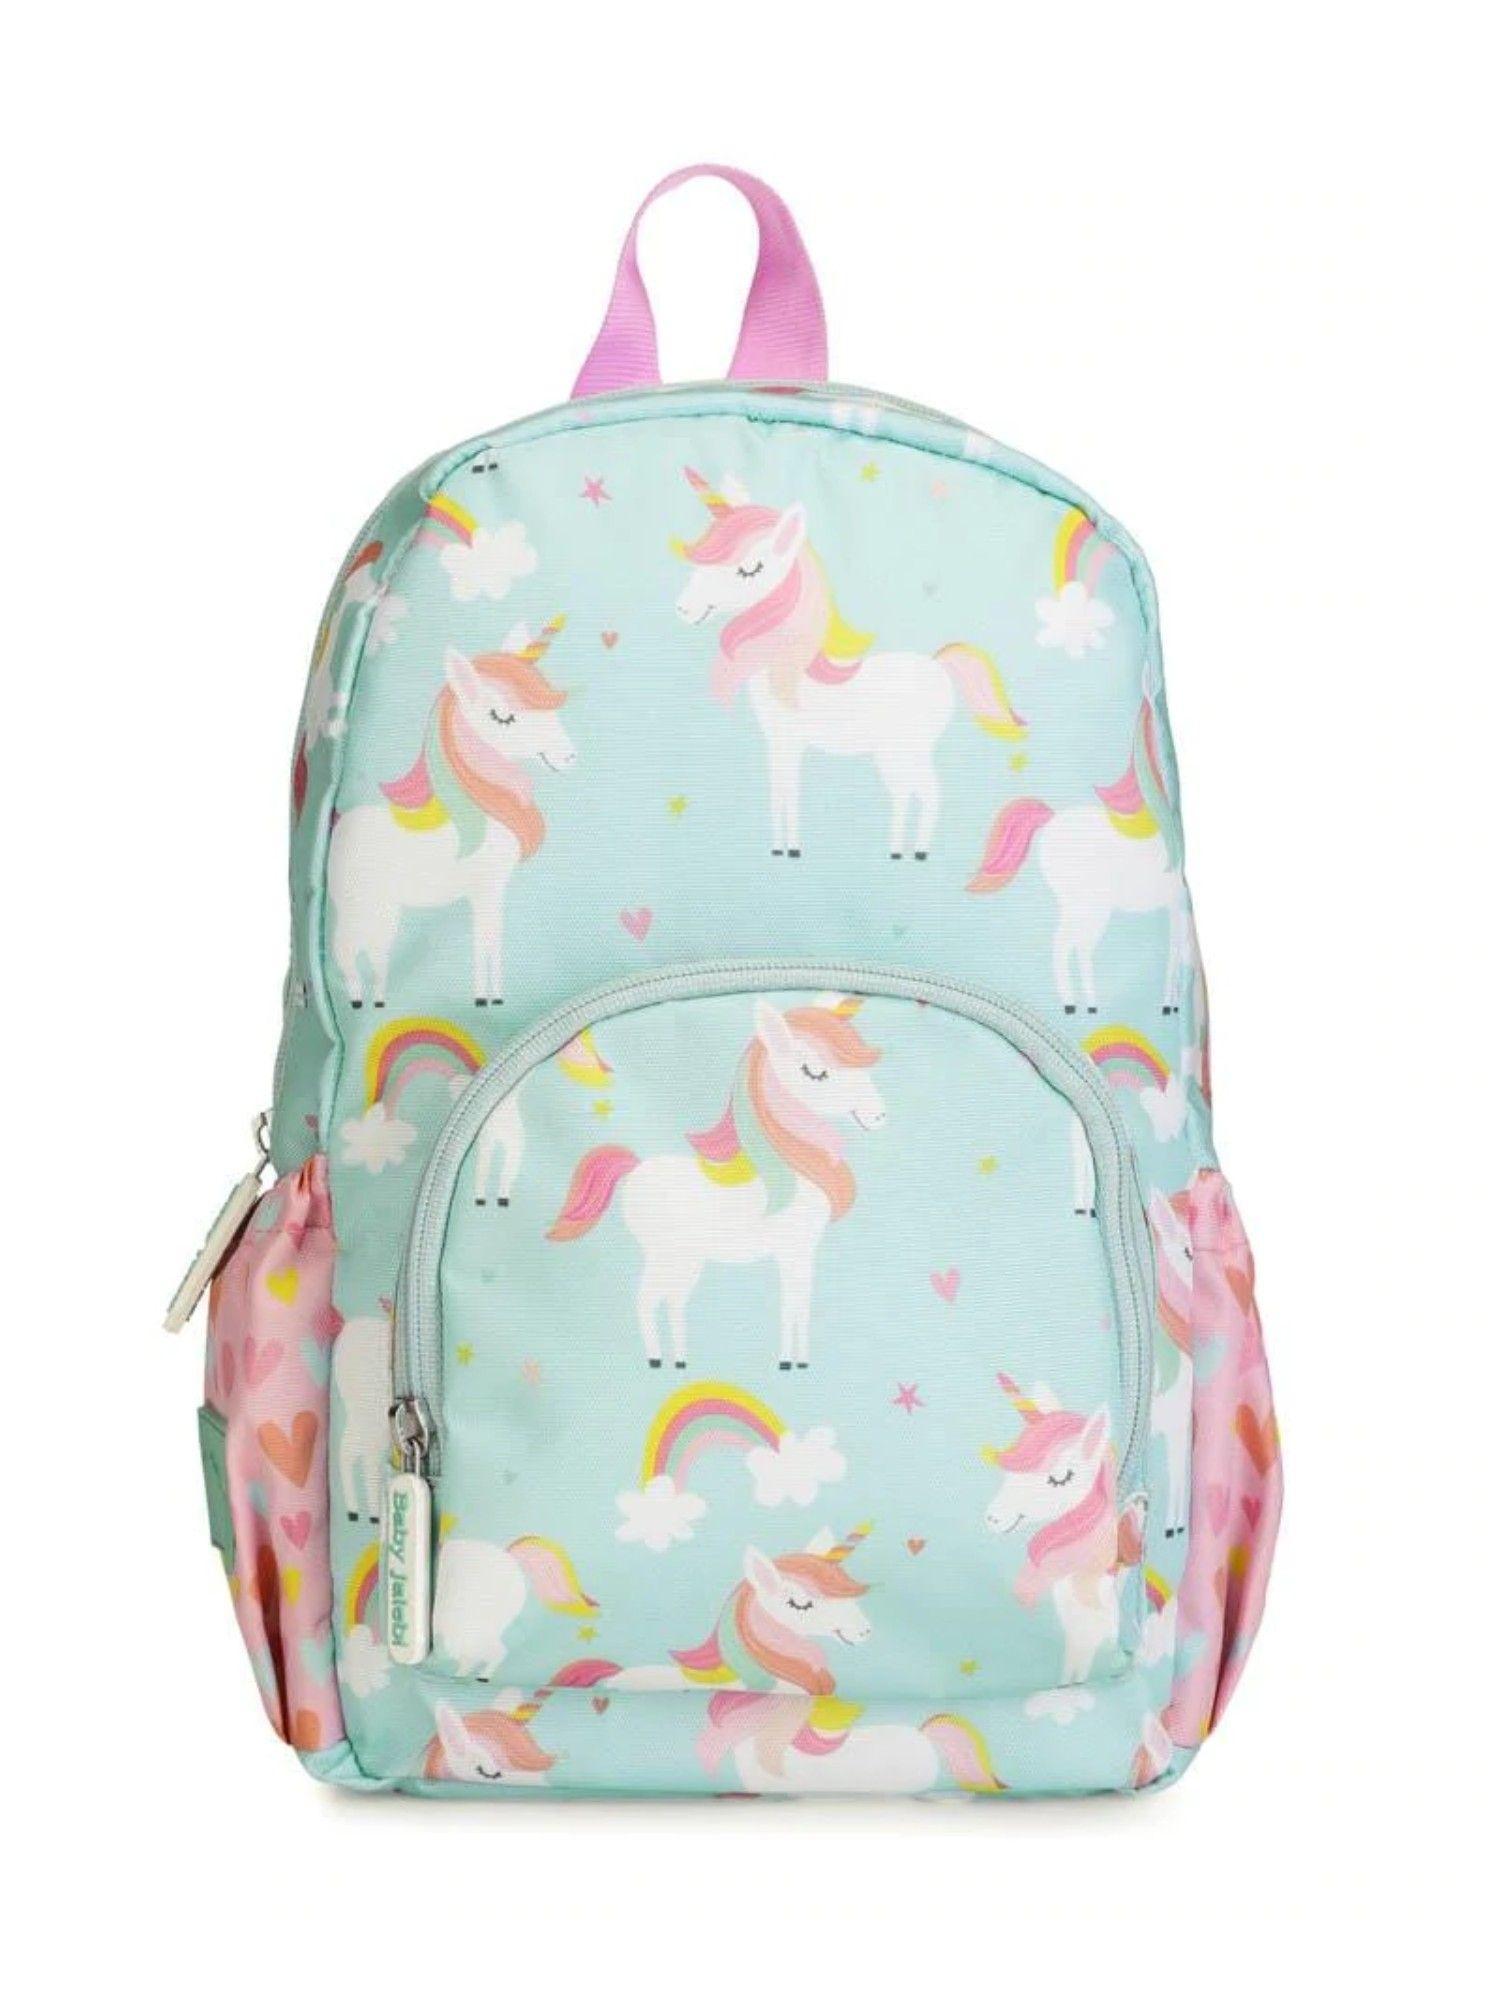 starlight unicorn mini backpack 18 months 3 years personalize your bag